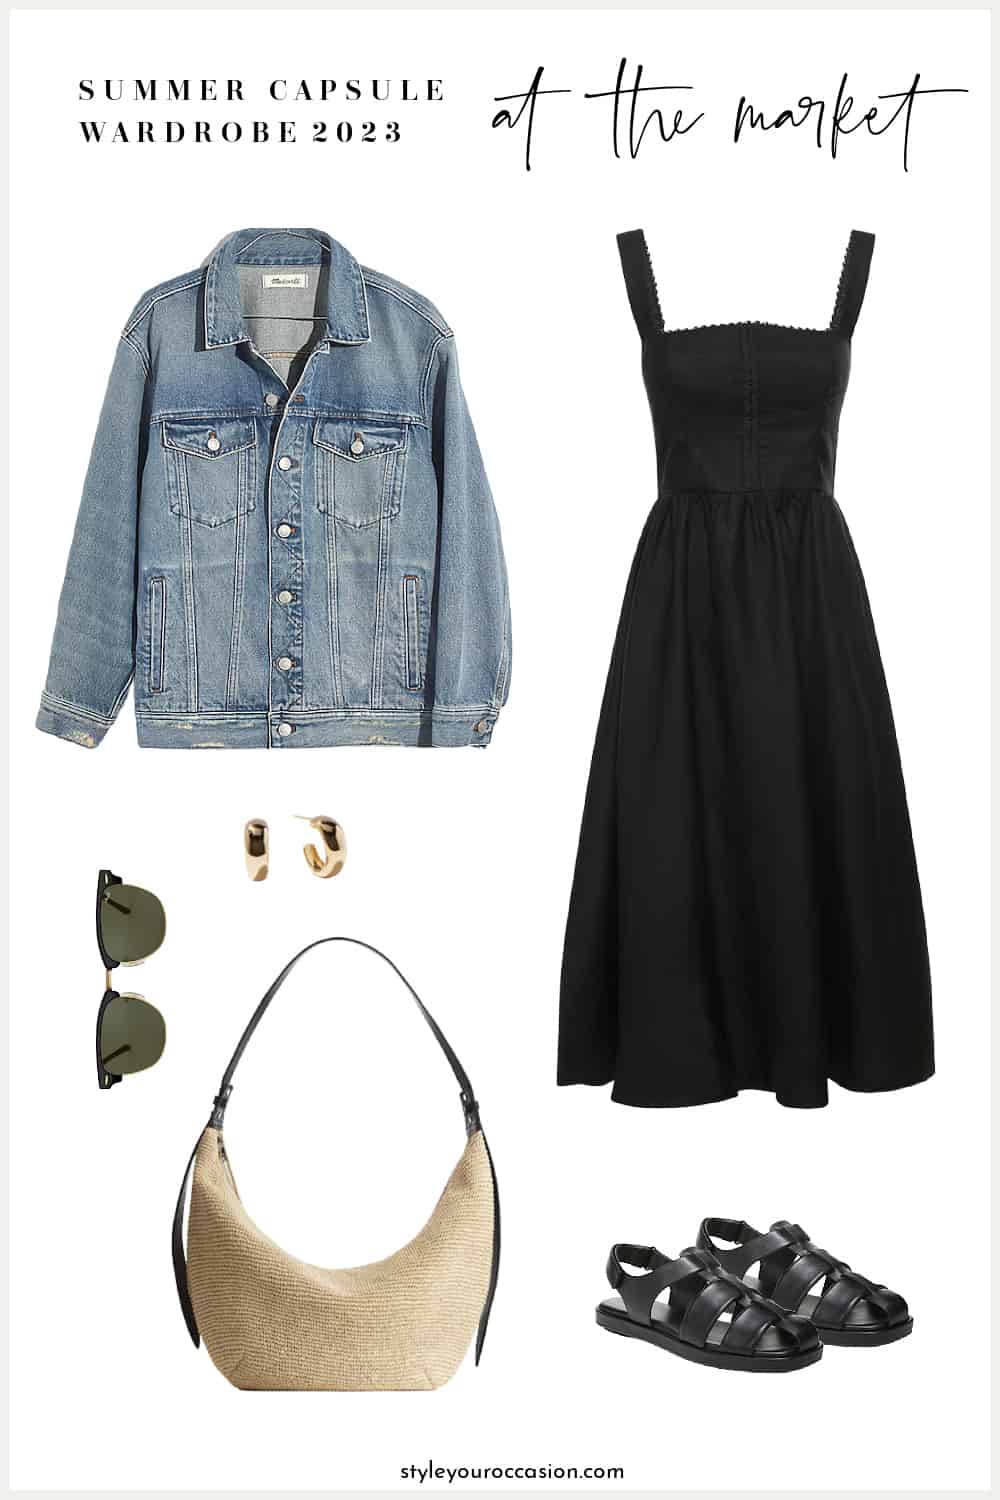 outfit mood board for a summer capsule wardrobe with a black linen midi dress, denim jacket, straw tote bag, black fisherman sandals, earrings, and sunglasses 